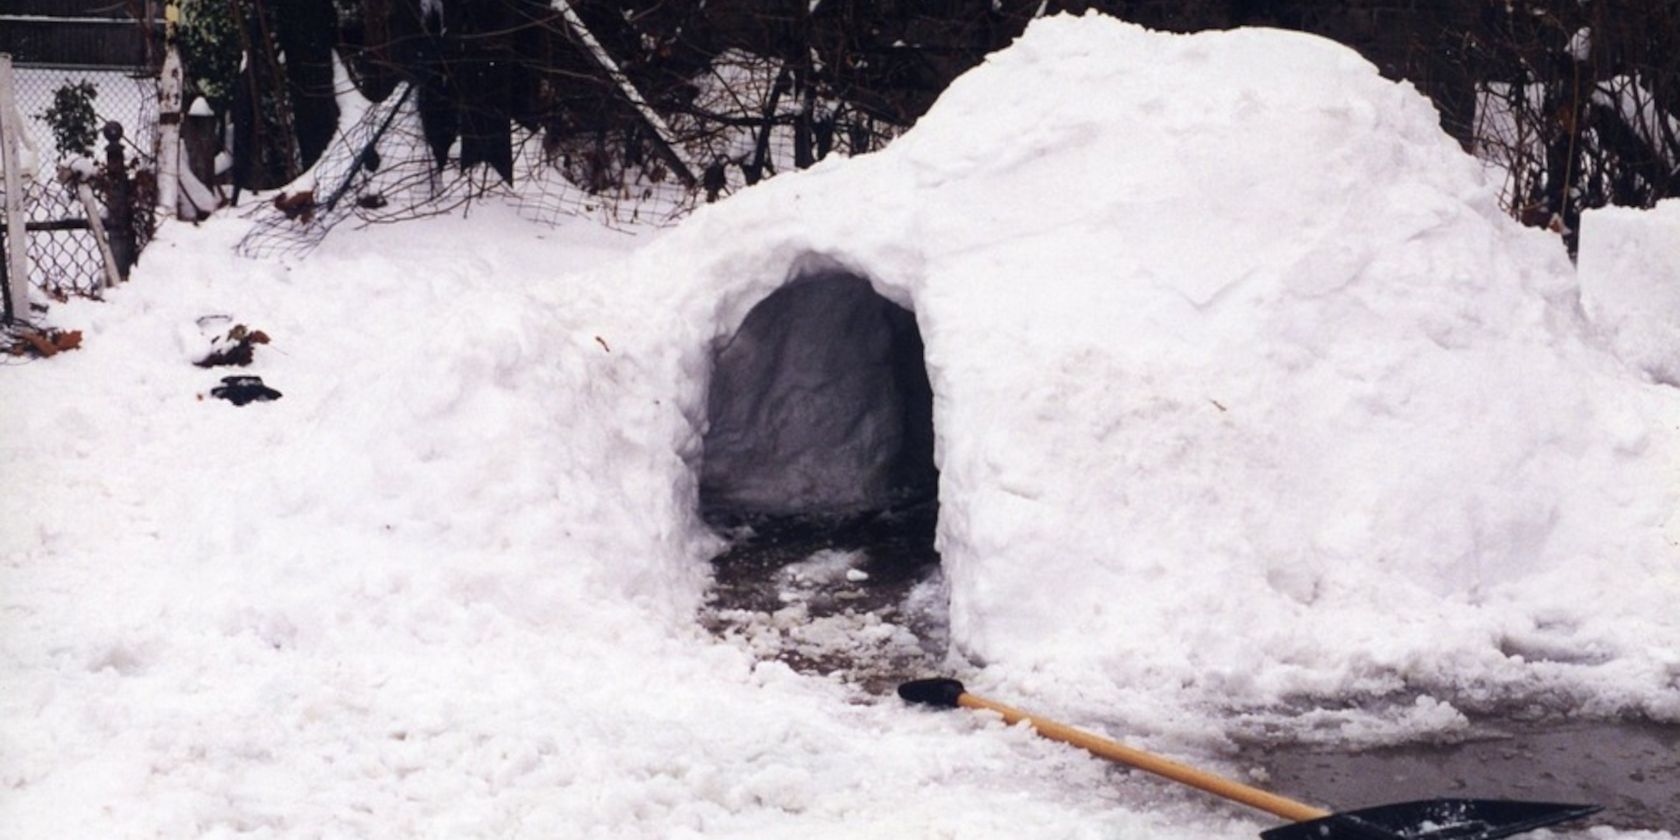 an igloo style snow shelter